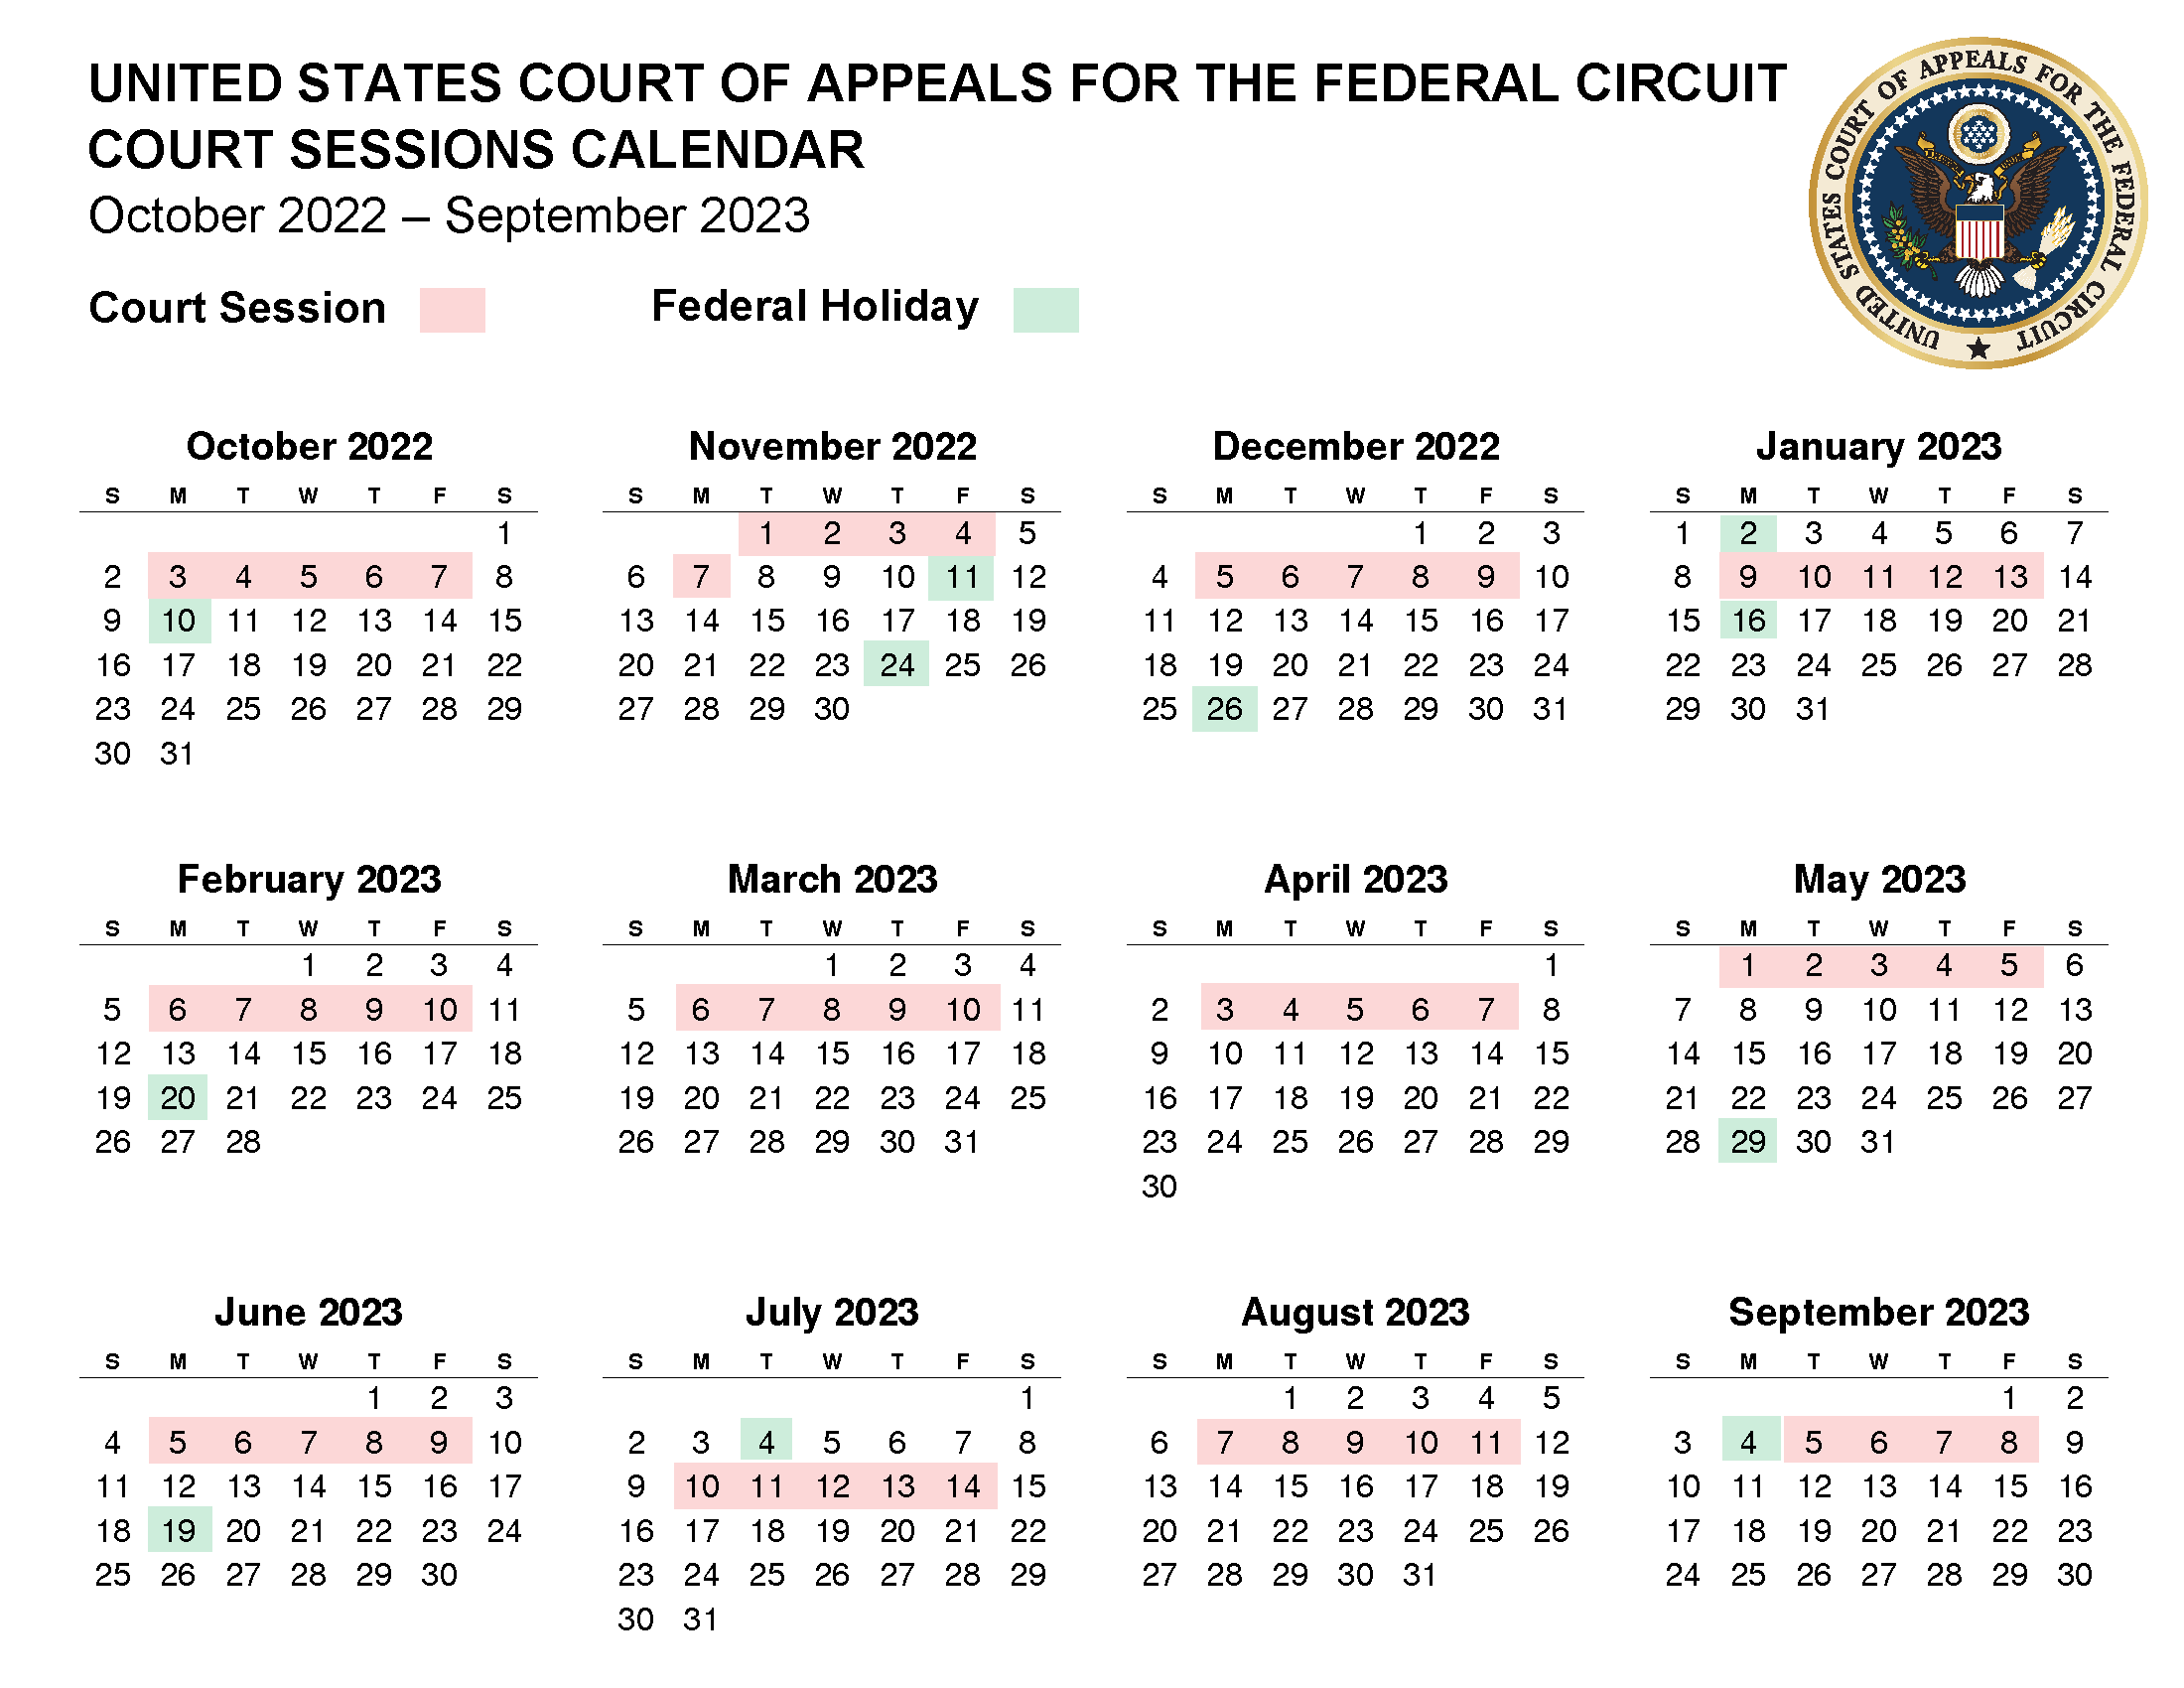 Court Sessions Calendars U.S. Court of Appeals for the Federal Circuit